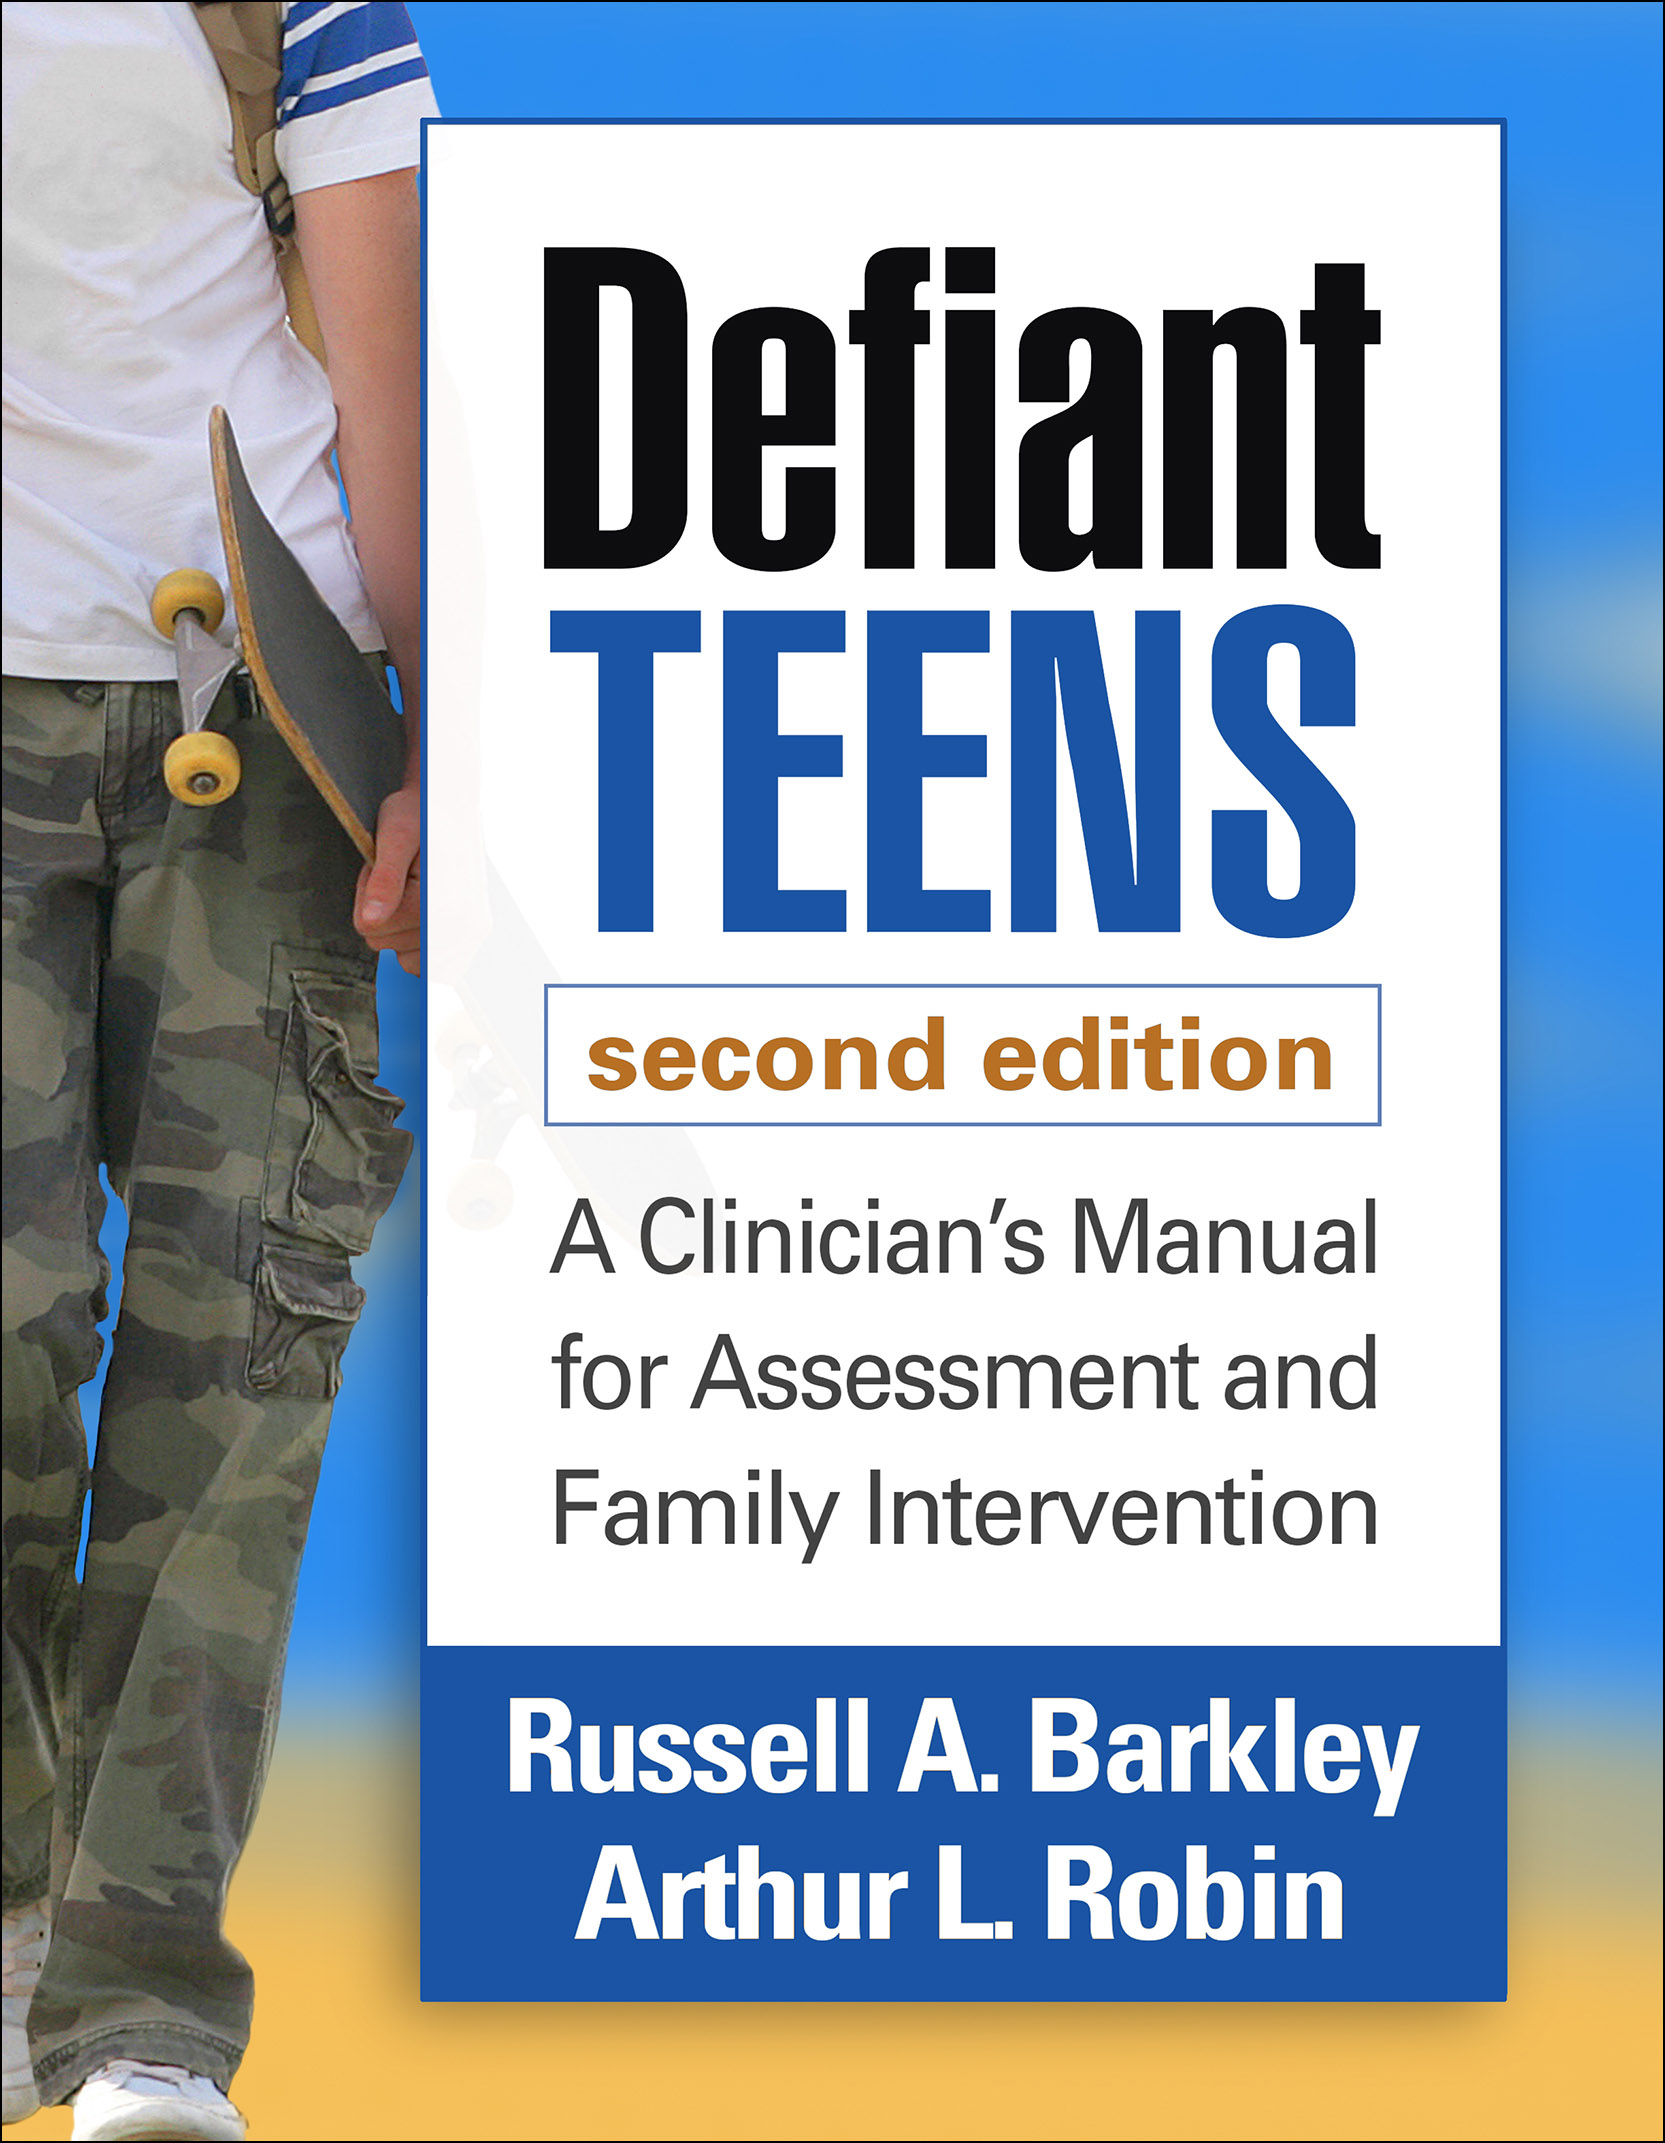 Defiant Teens: Second Edition: A Clinician's Manual for Assessment